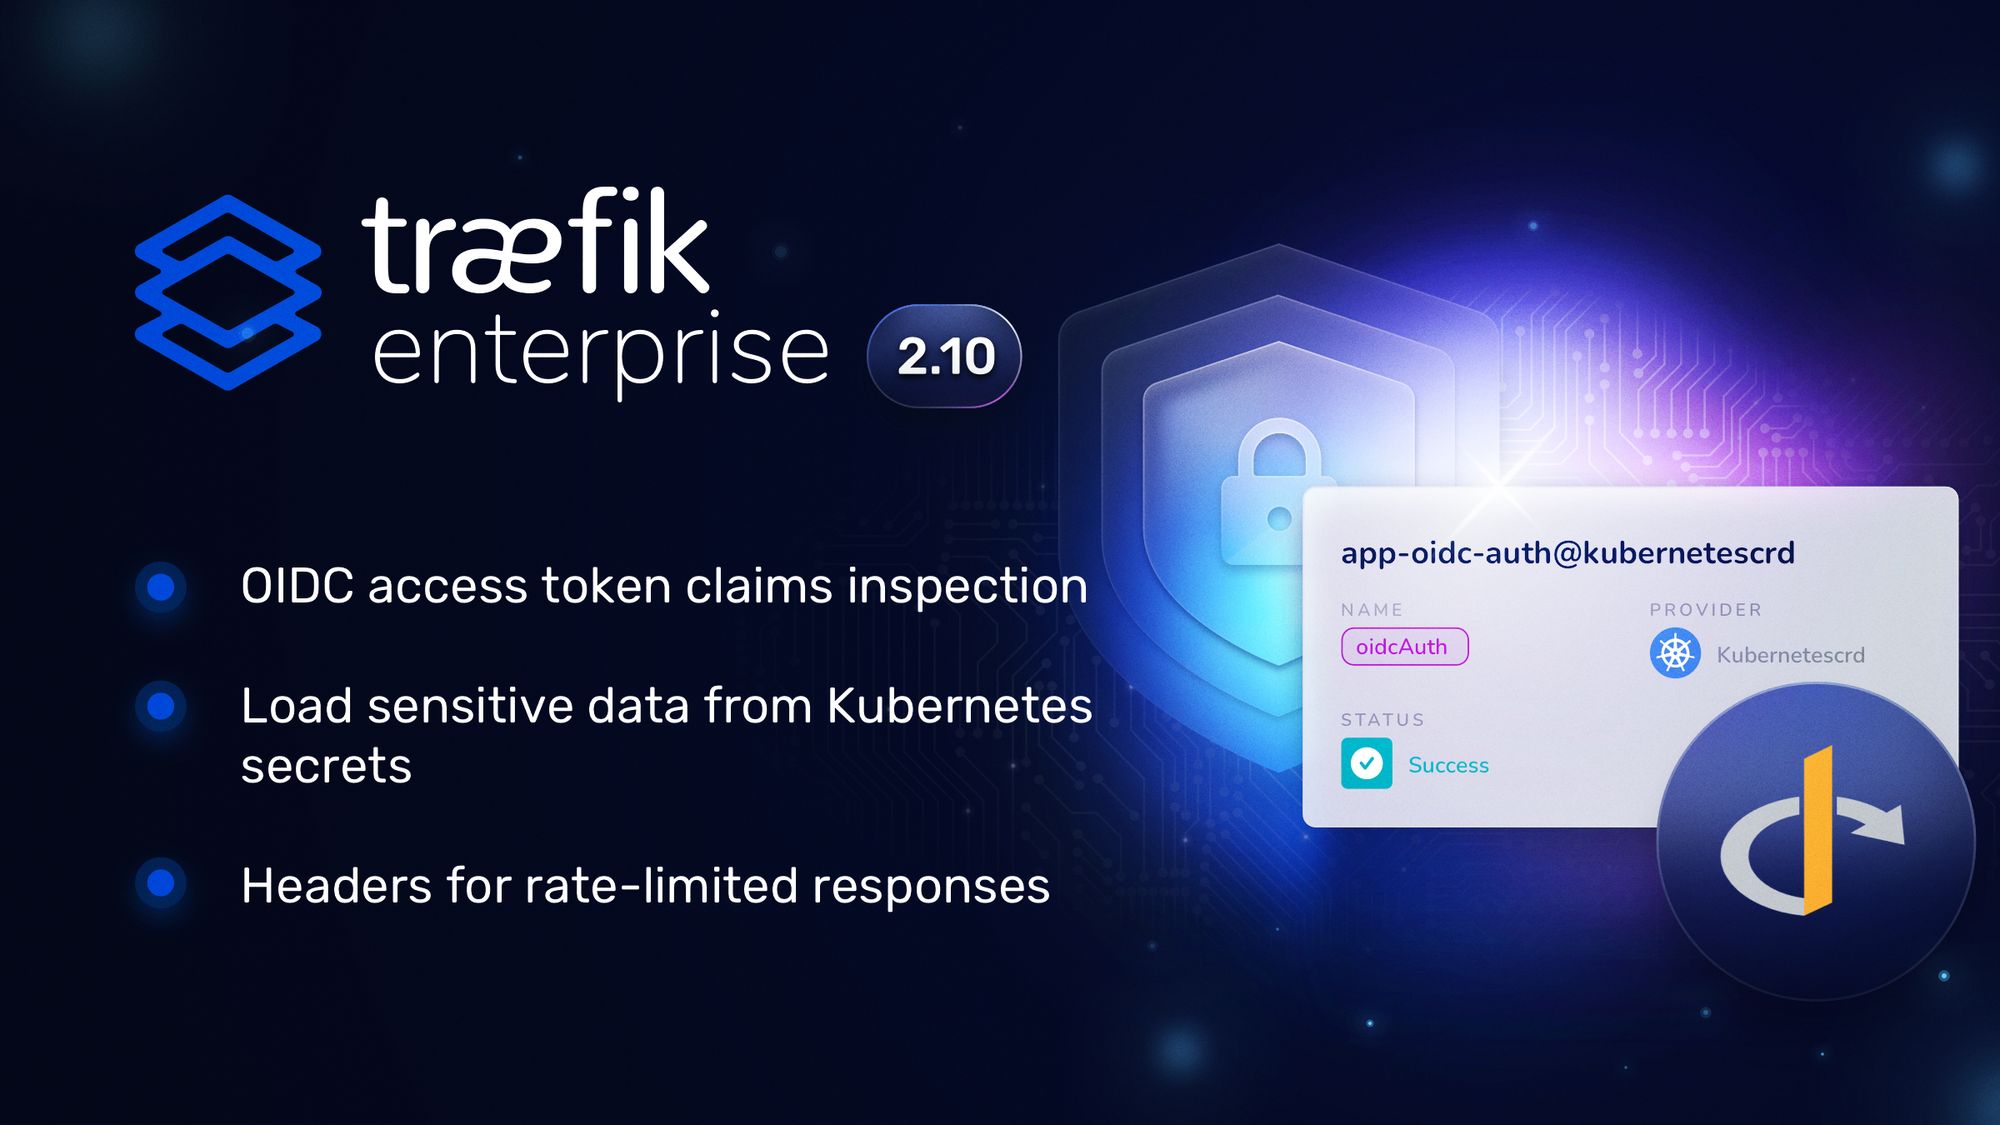 Traefik Enterprise 2.10 with support for claim data in OIDC access tokens